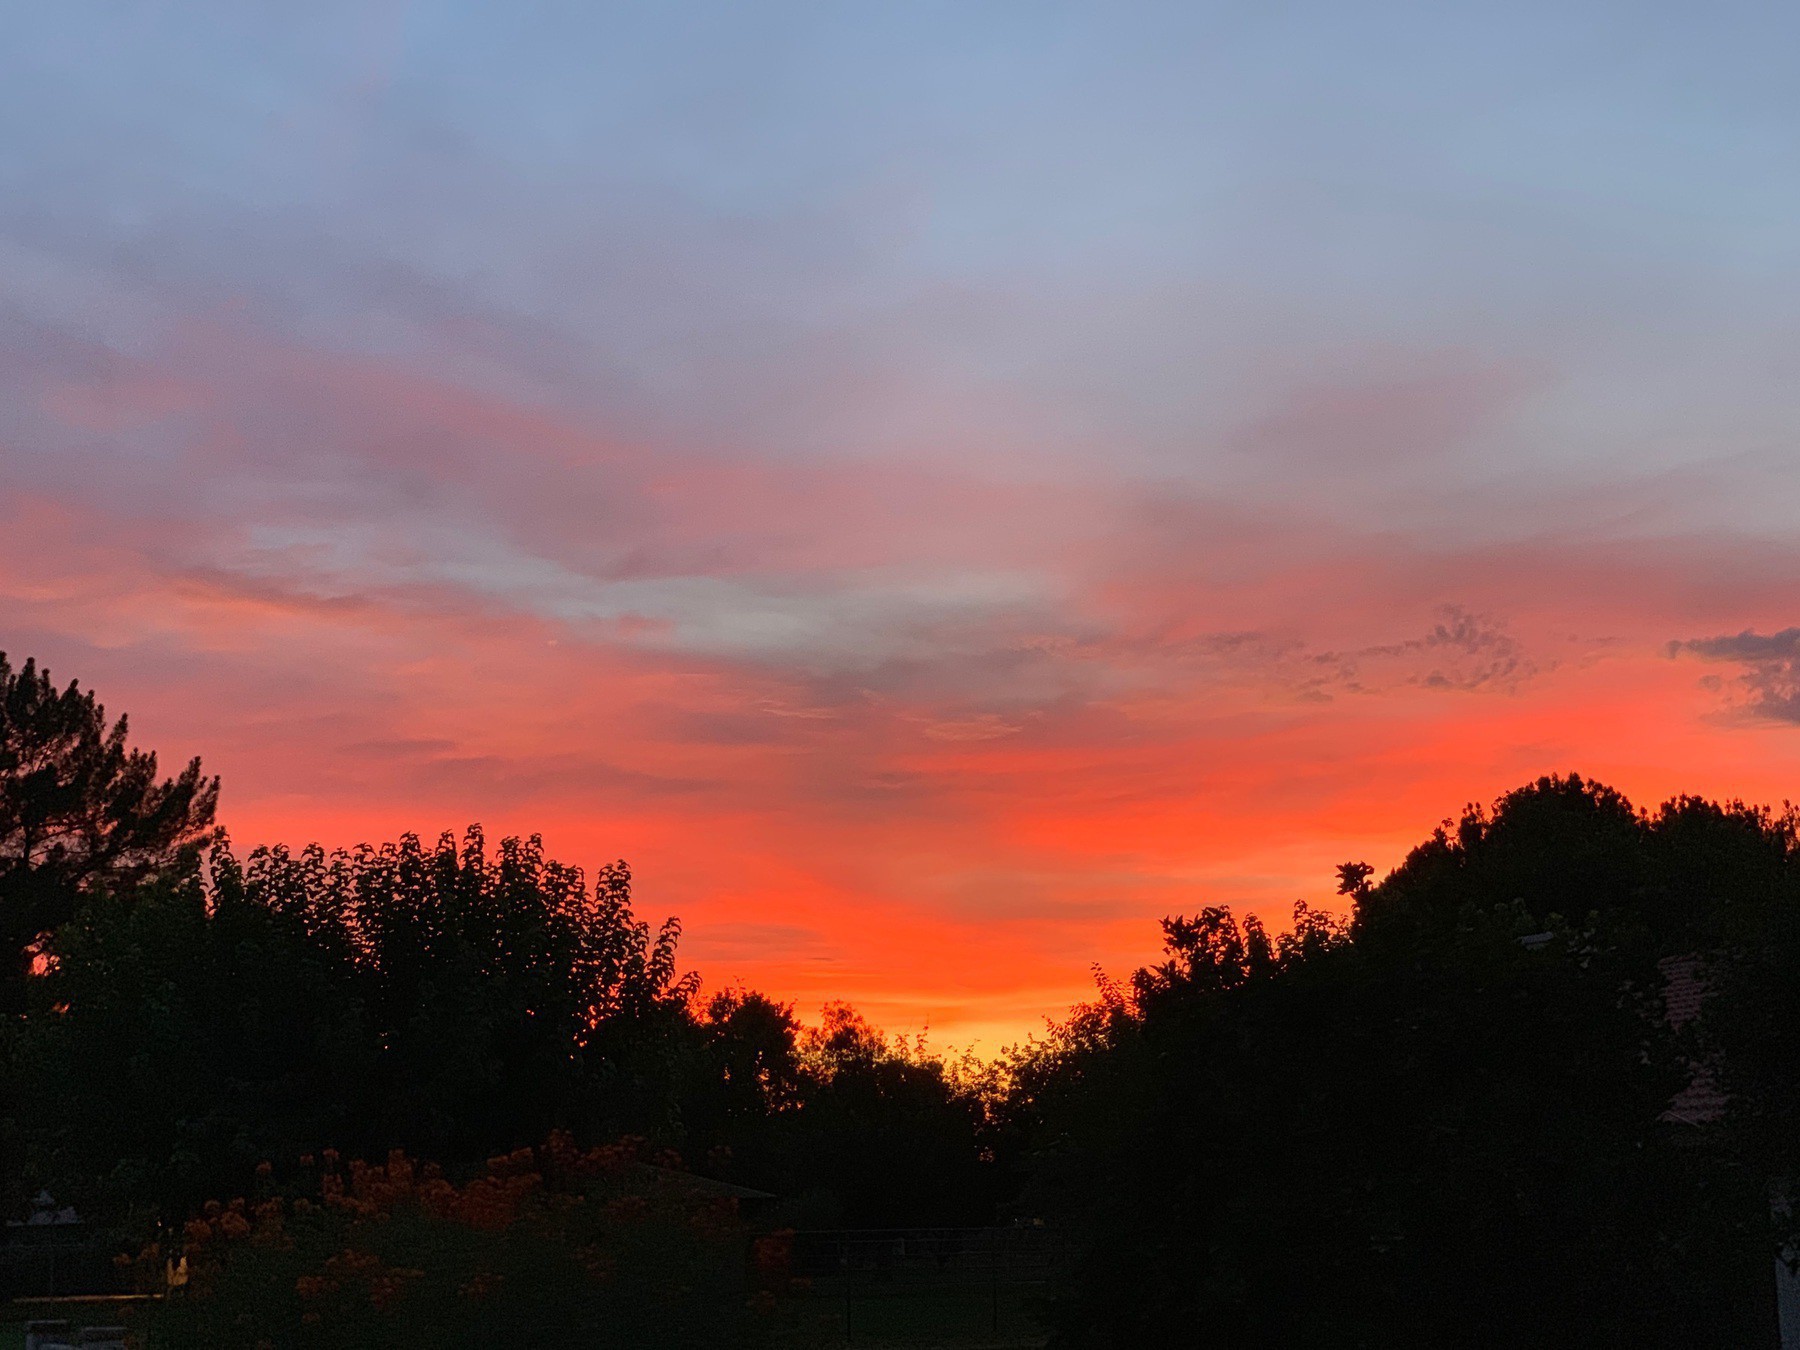 sunset sky of blue fading to fire red with tree silhouettes along image bottom